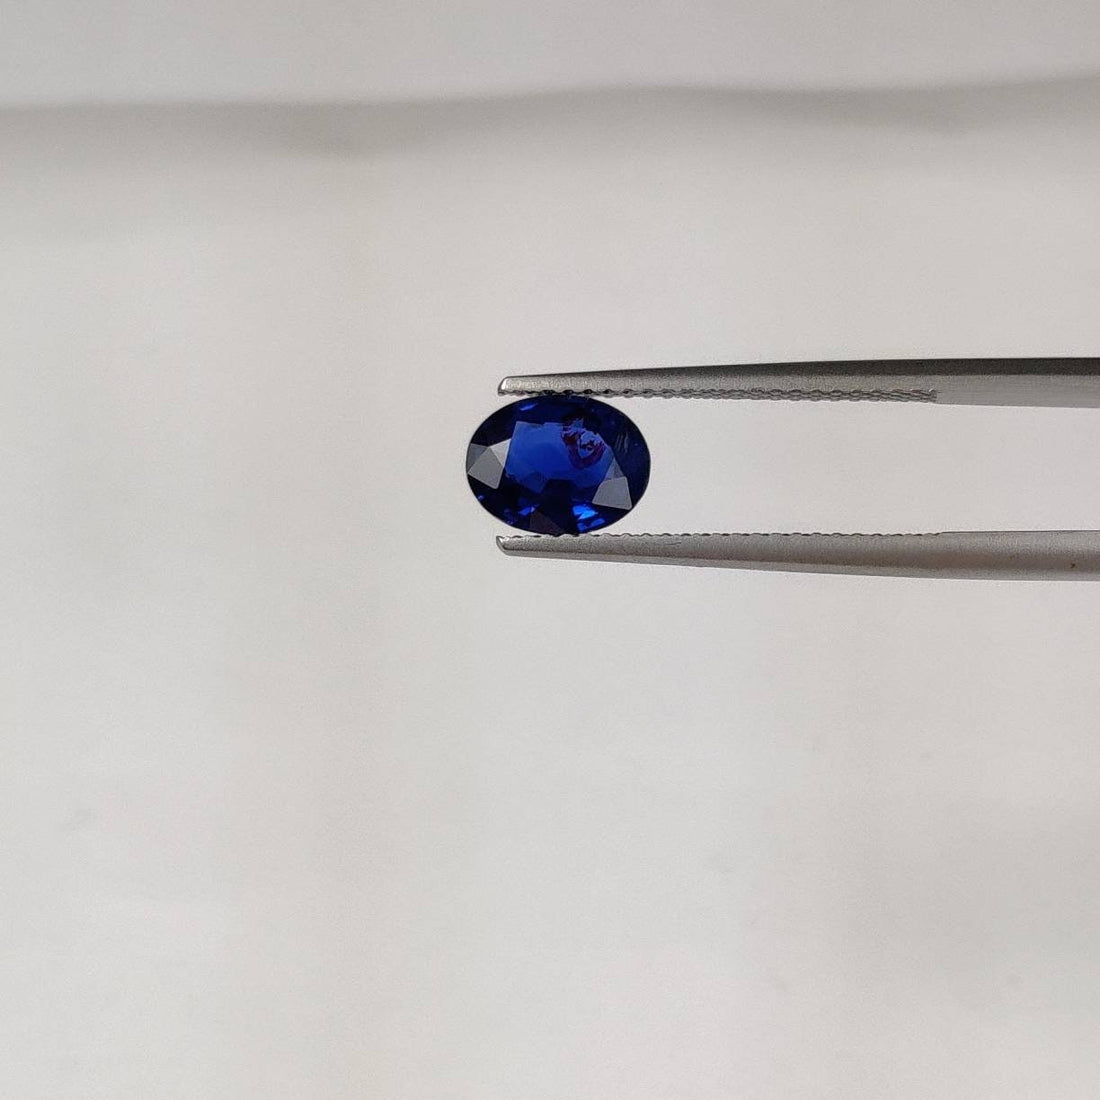 1.19 cts Unheated Natural Blue Sapphire Loose Gemstone Oval Cut Certified